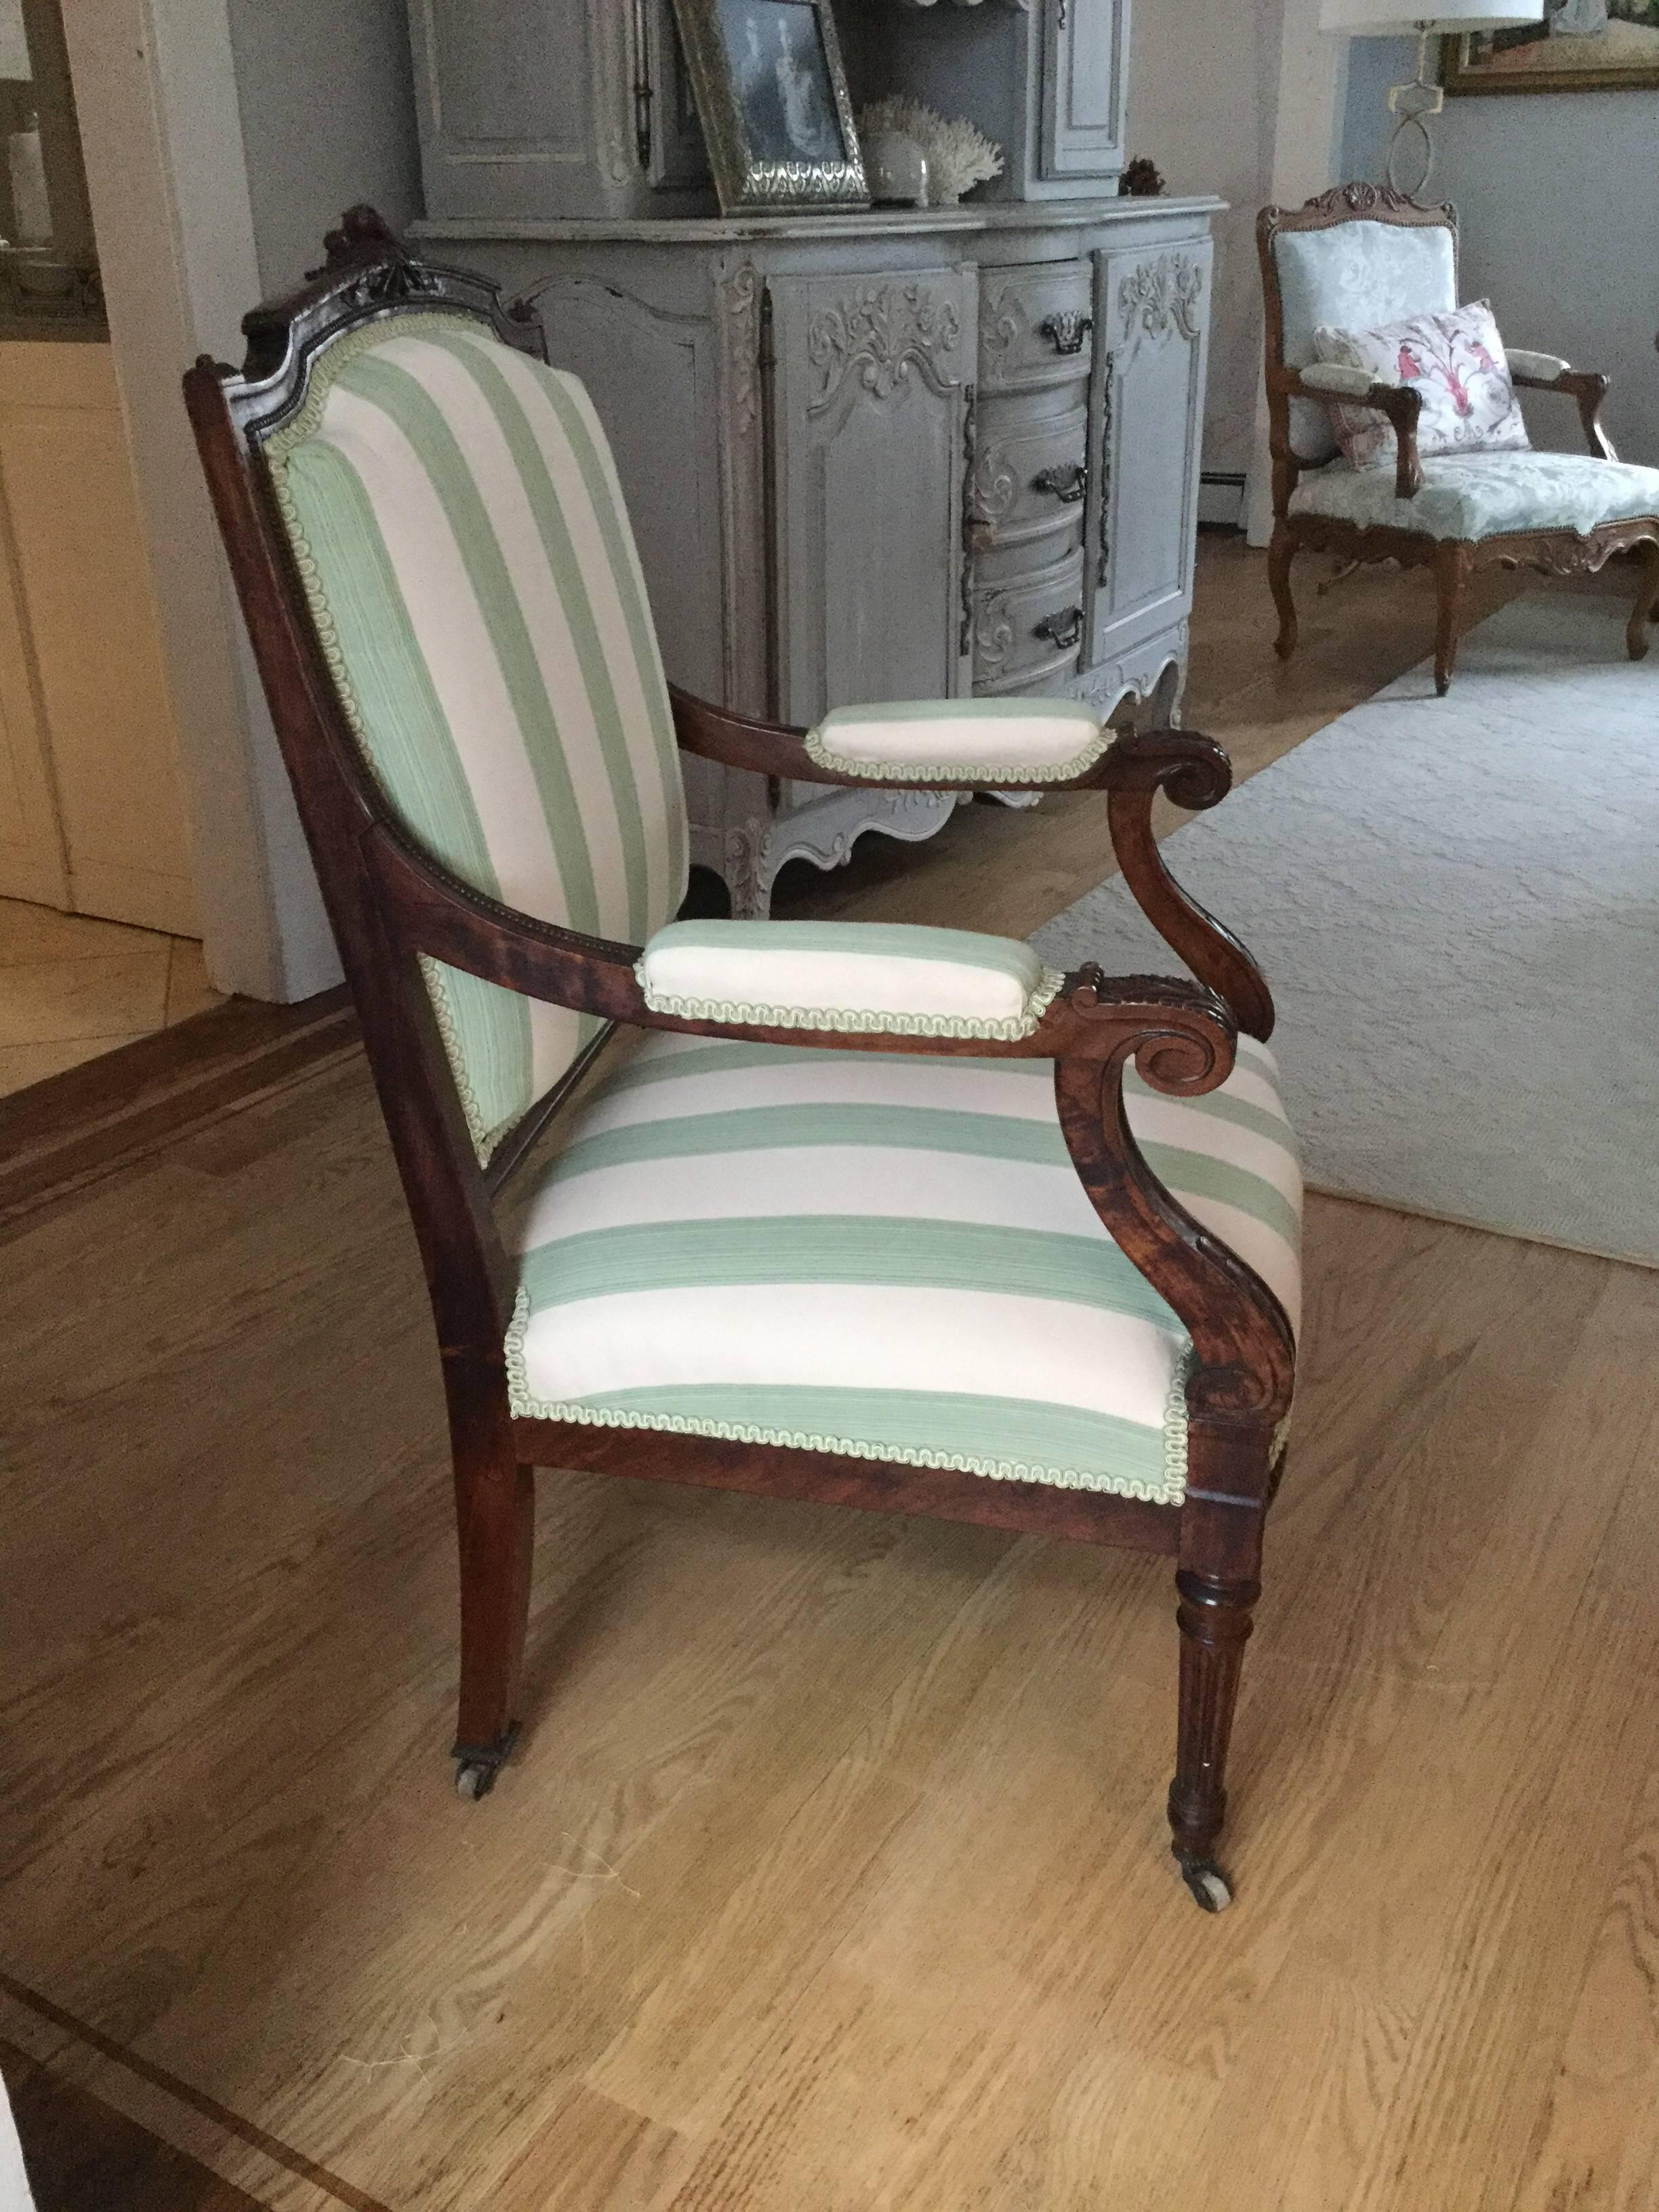 Stunning Louis XVI style armchair having a beautifully carved fruitwood frame with crest of small roses and acanthus leaves on the legs, upholstered in a wide green and white stripe with matching trim.

 